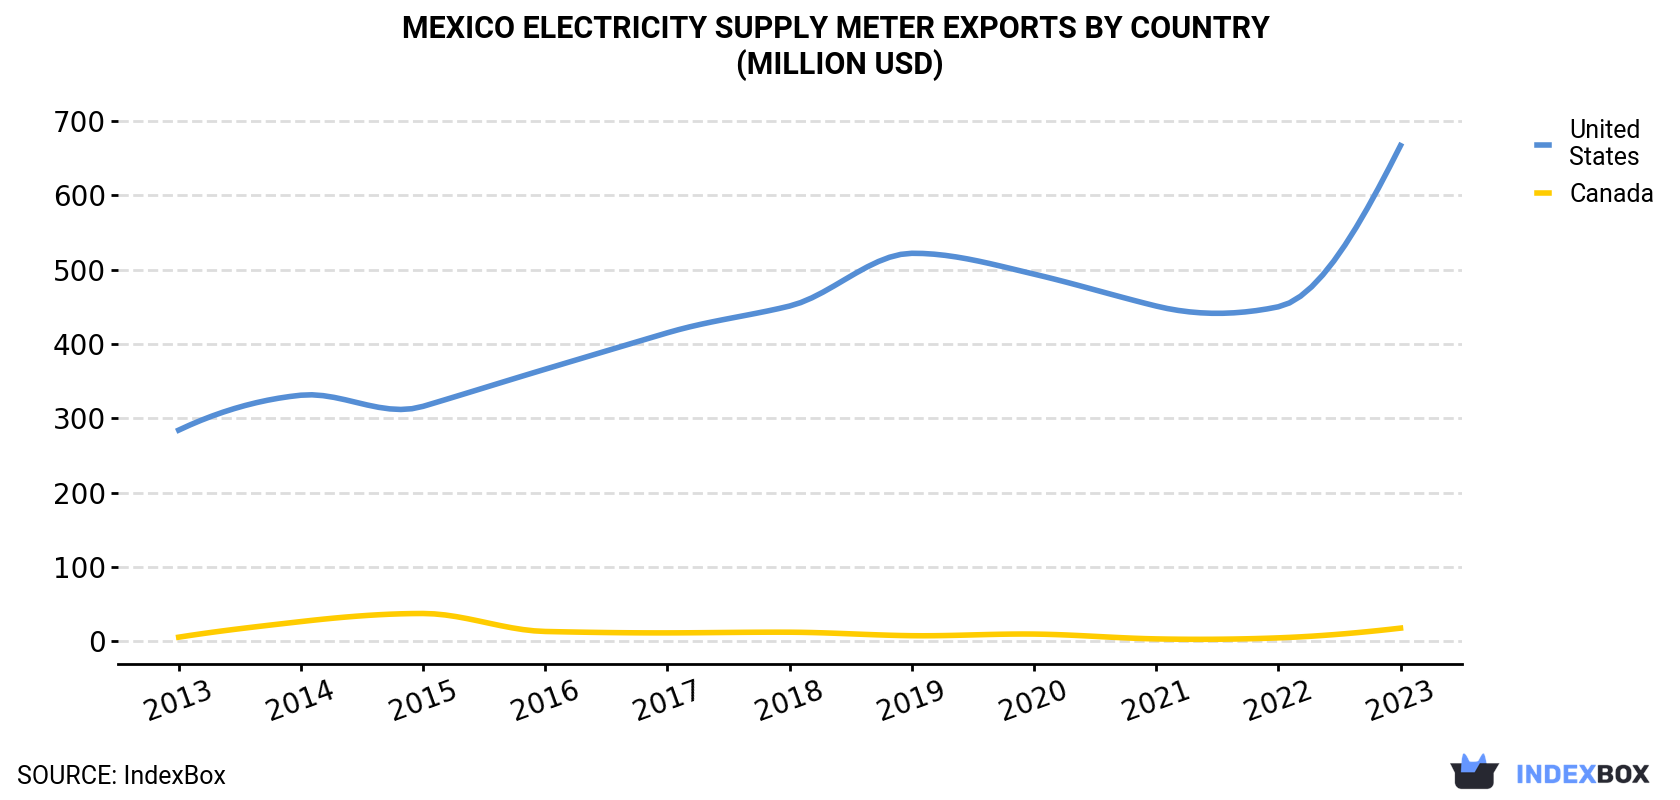 Mexico Electricity Supply Meter Exports By Country (Million USD)